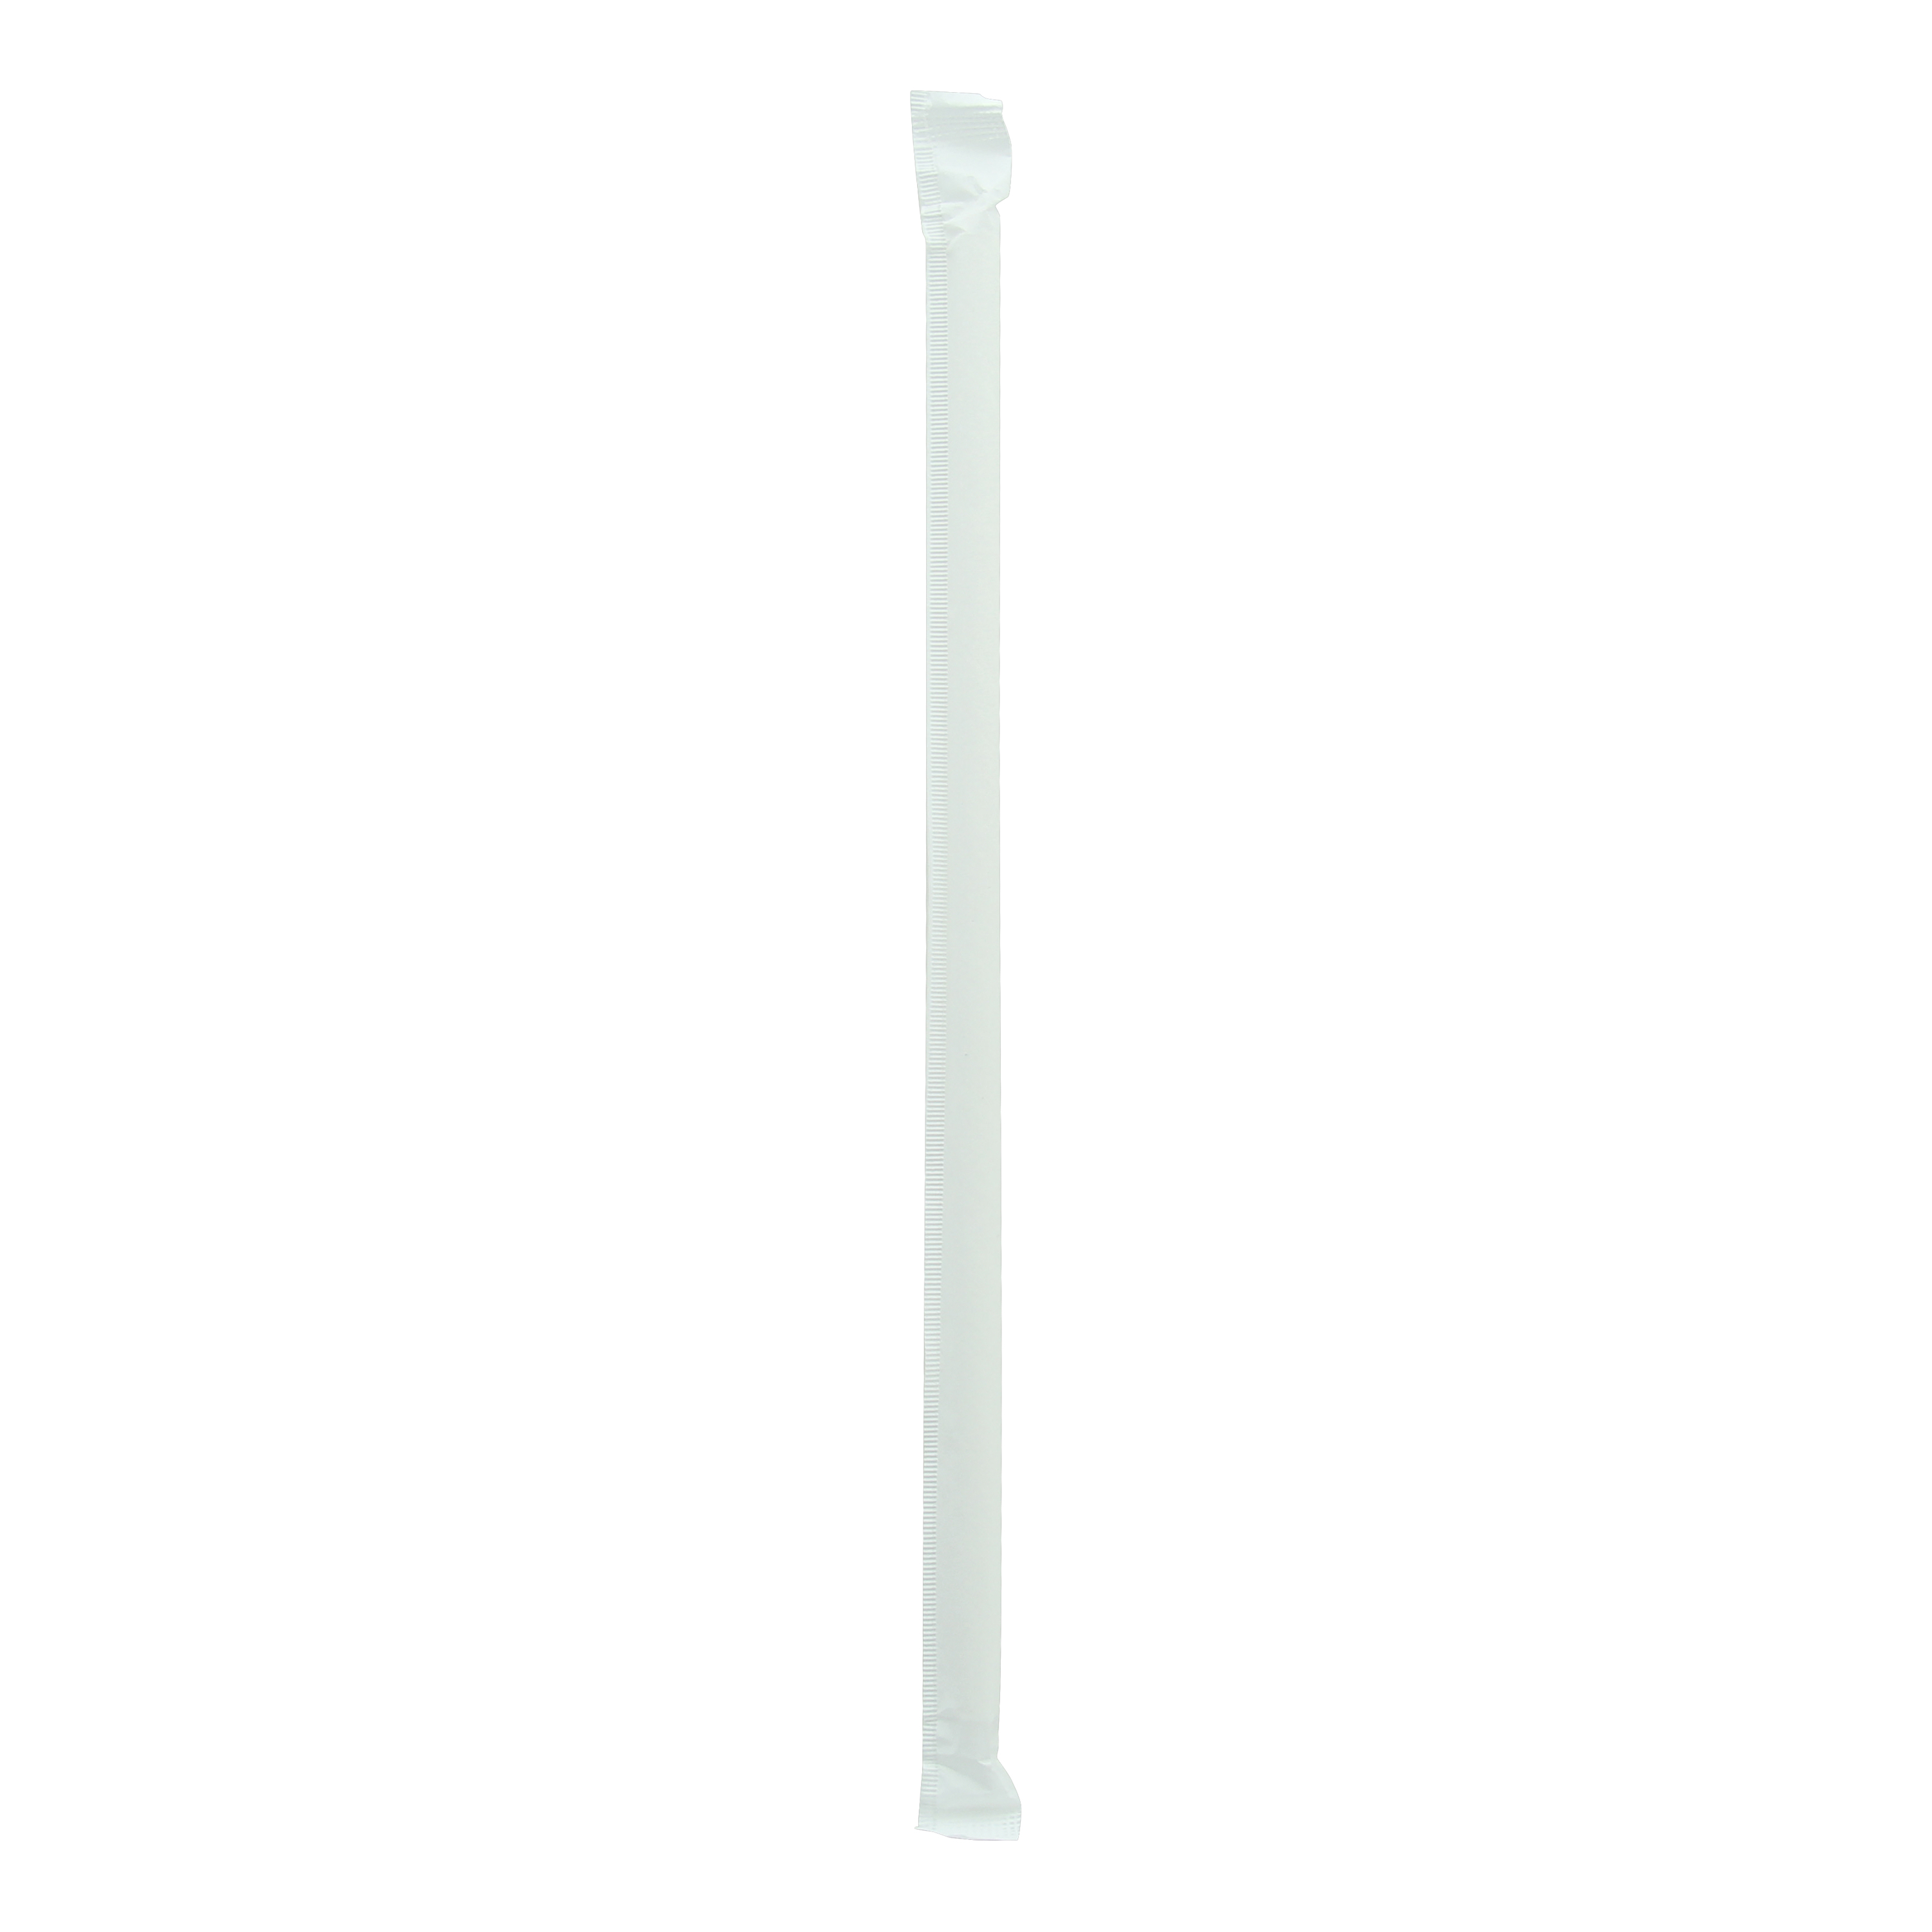 A wrapped paper straw